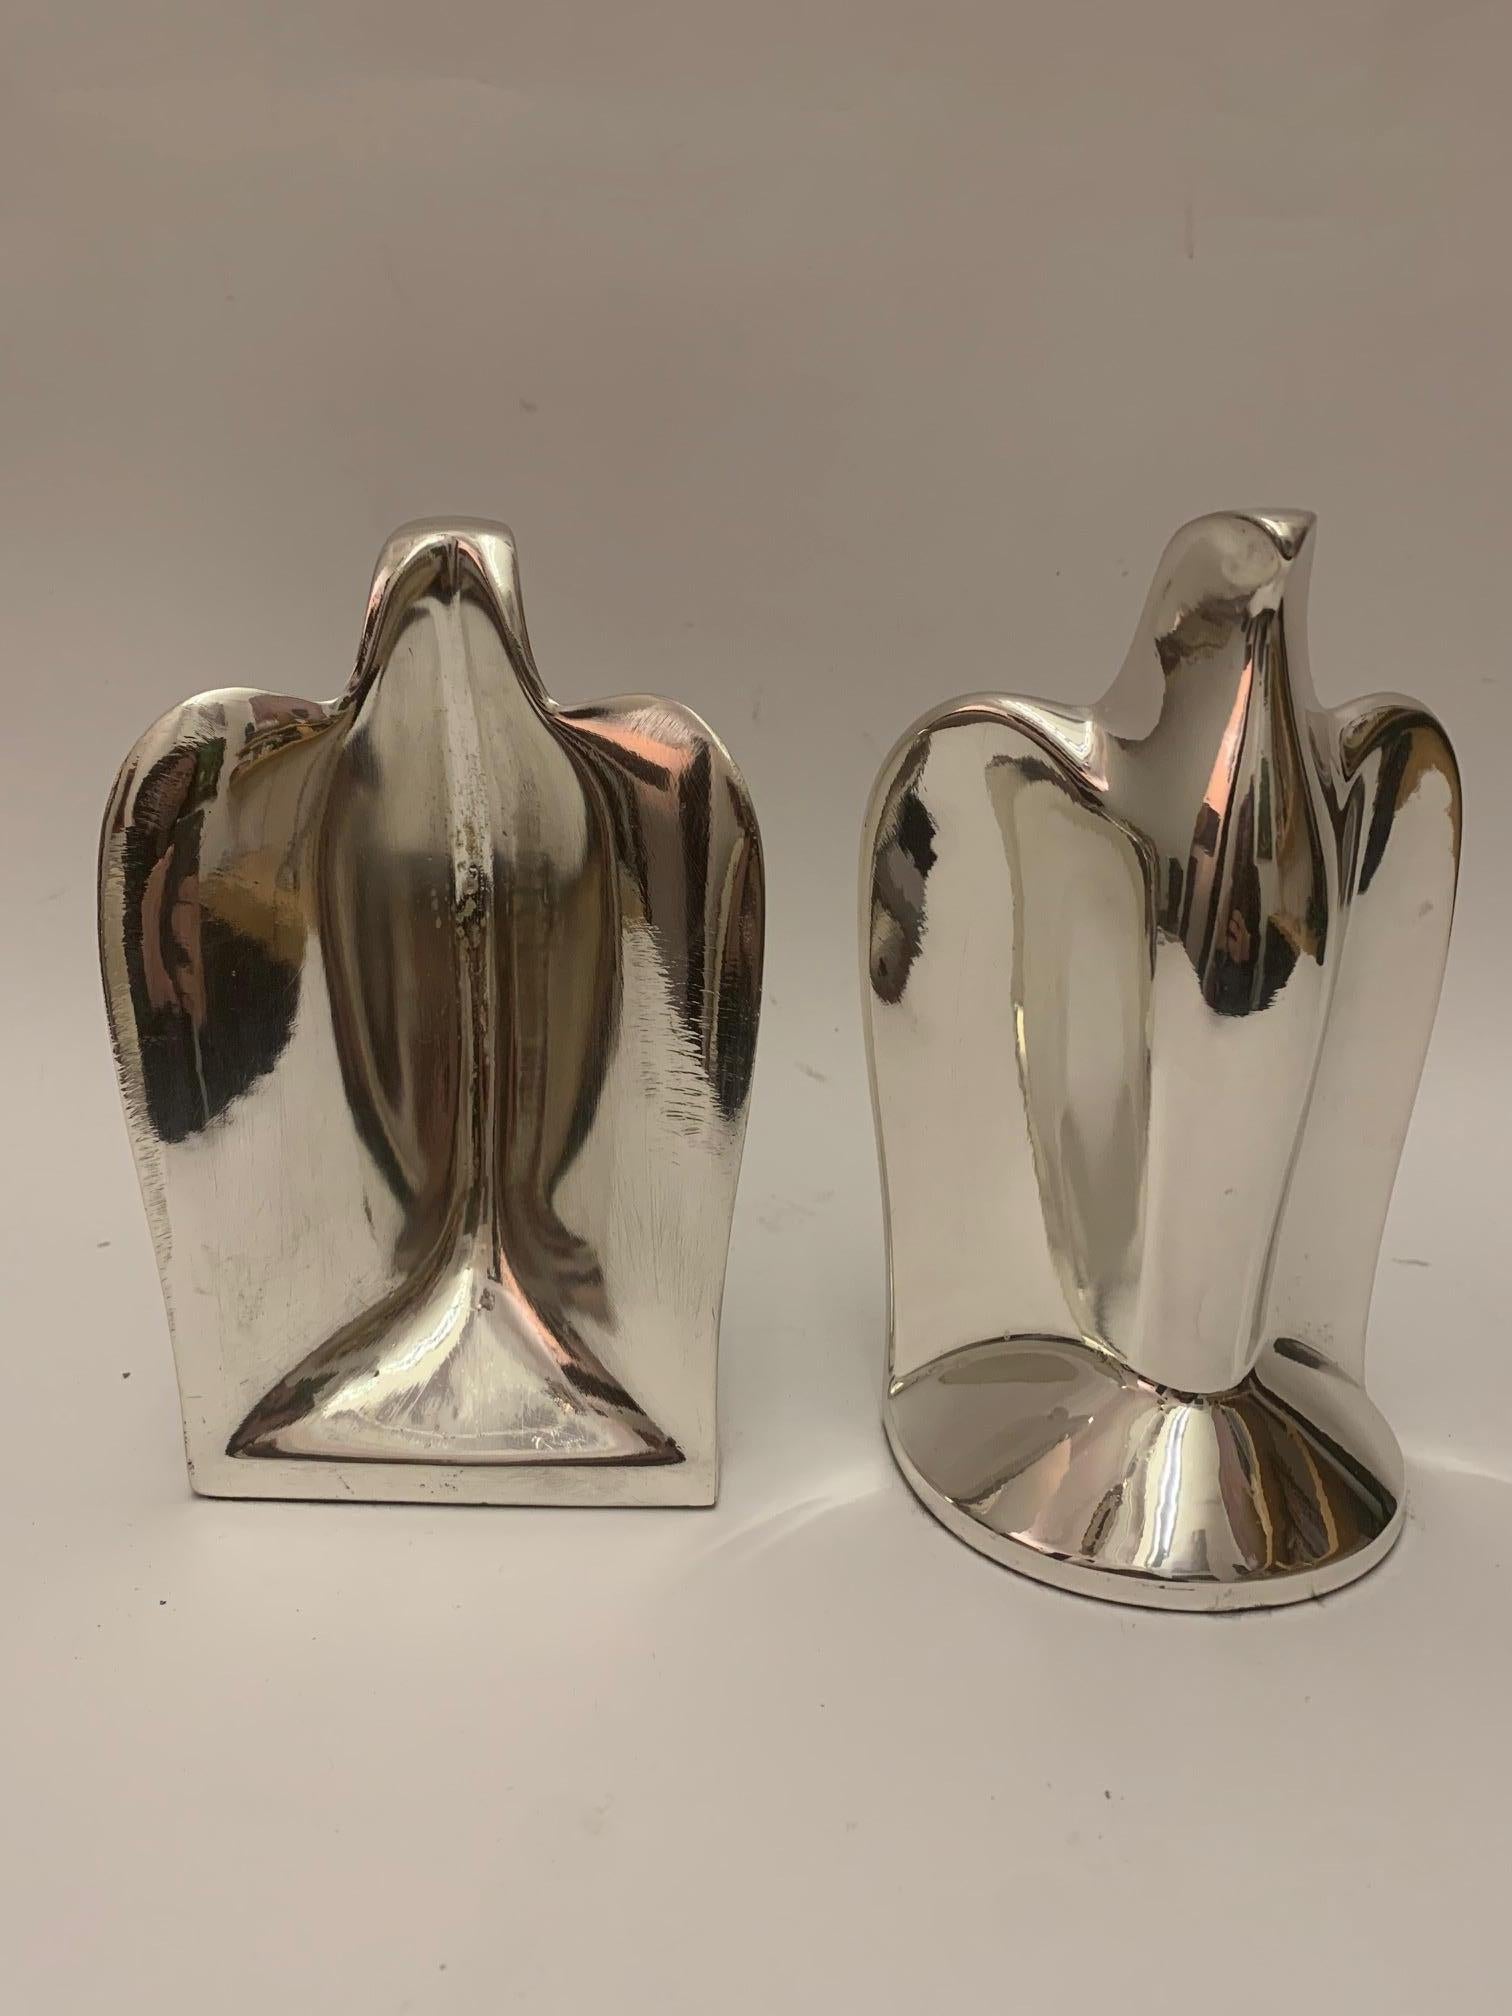 Art Deco nickel-plated bird bookends. Streamlined yet rectilinear, these abstract pair of Deco birds are the perfect compliment to any bookcase or desk.

Property from esteemed interior designer Juan Montoya. Juan Montoya is one of the most